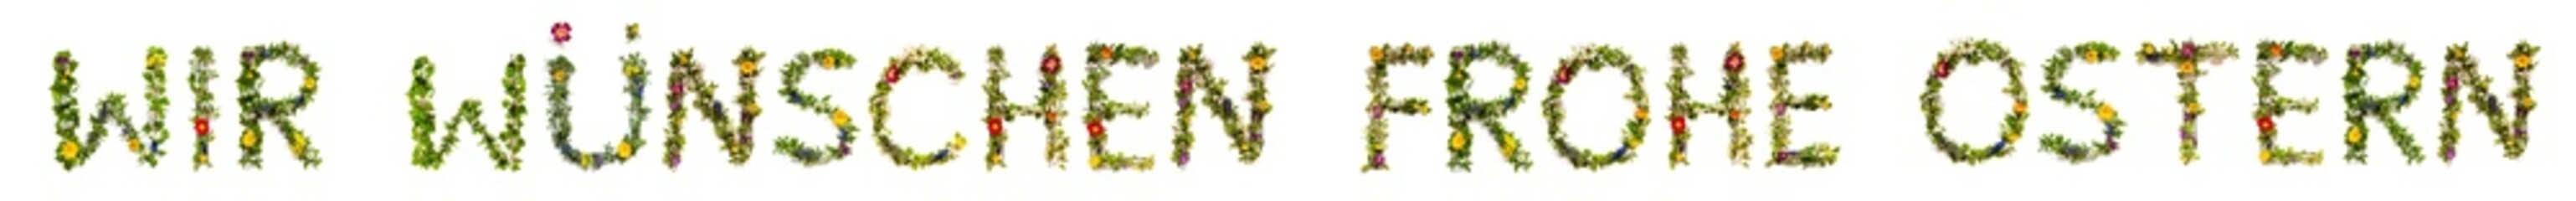 Blooming Flower Letters Building German Frohe Ostern Means Happy Easter